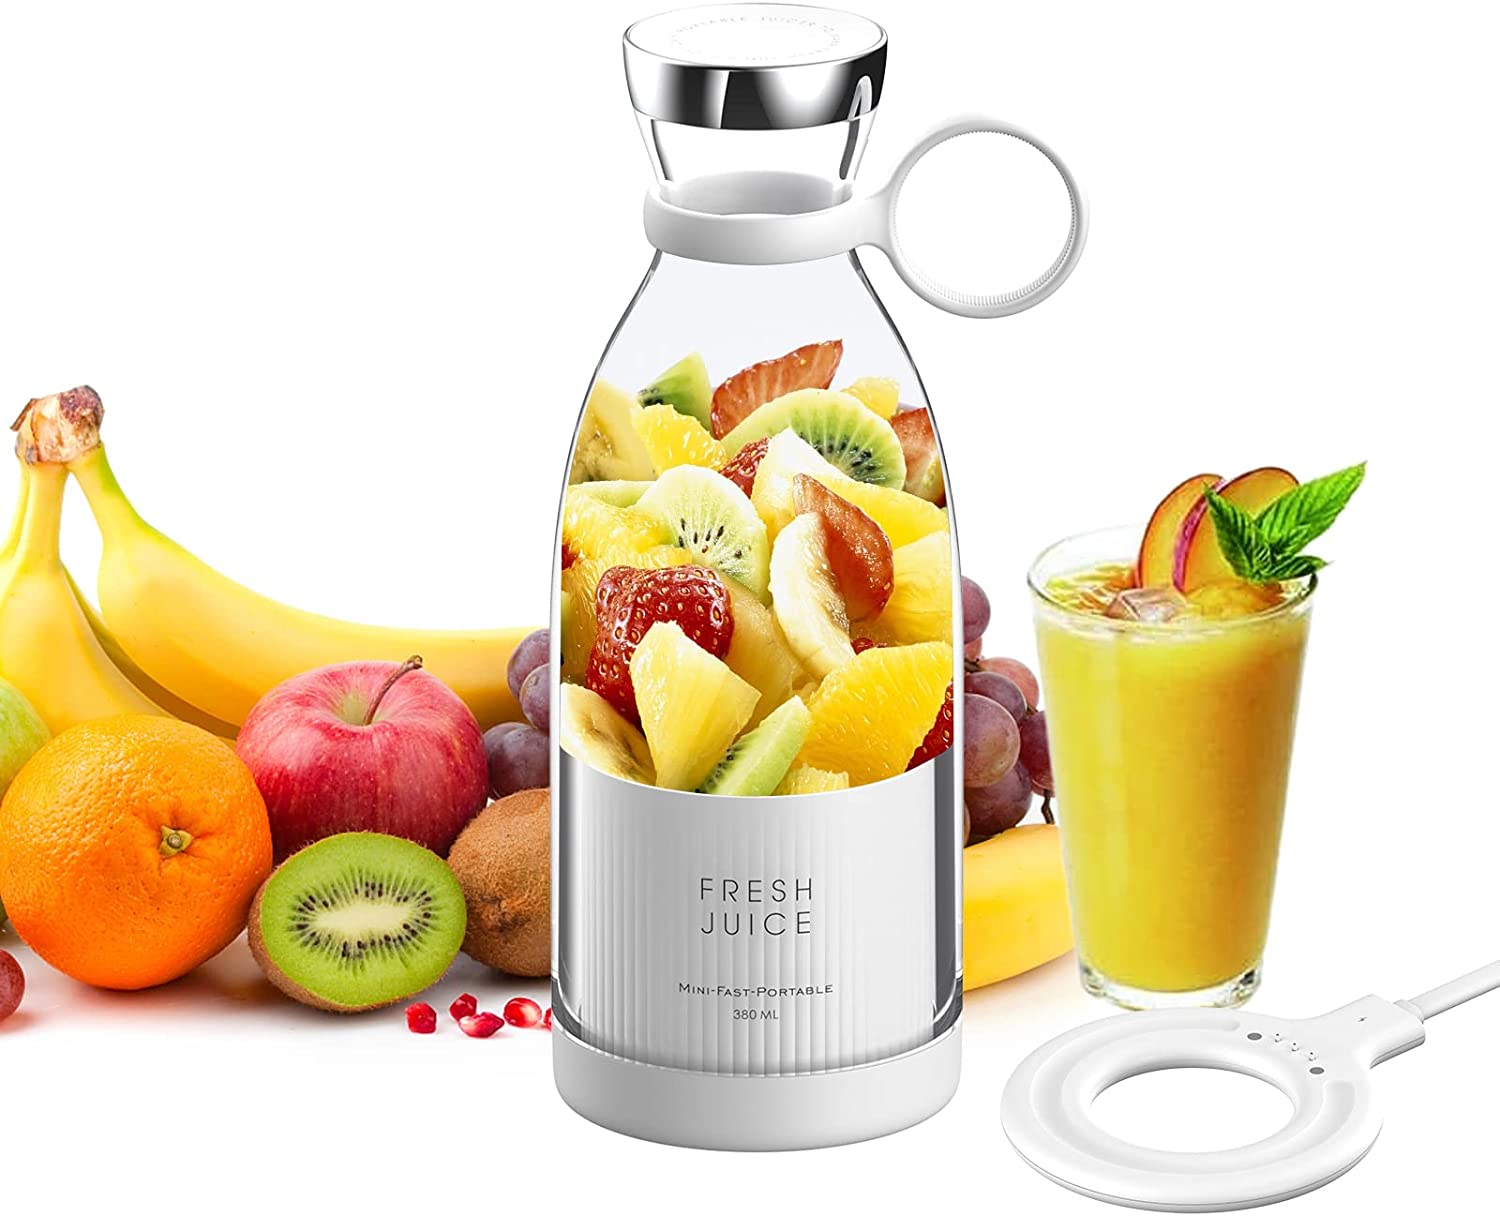  350ml Portable Instant Smoothie Juicer Blender with fruits in it